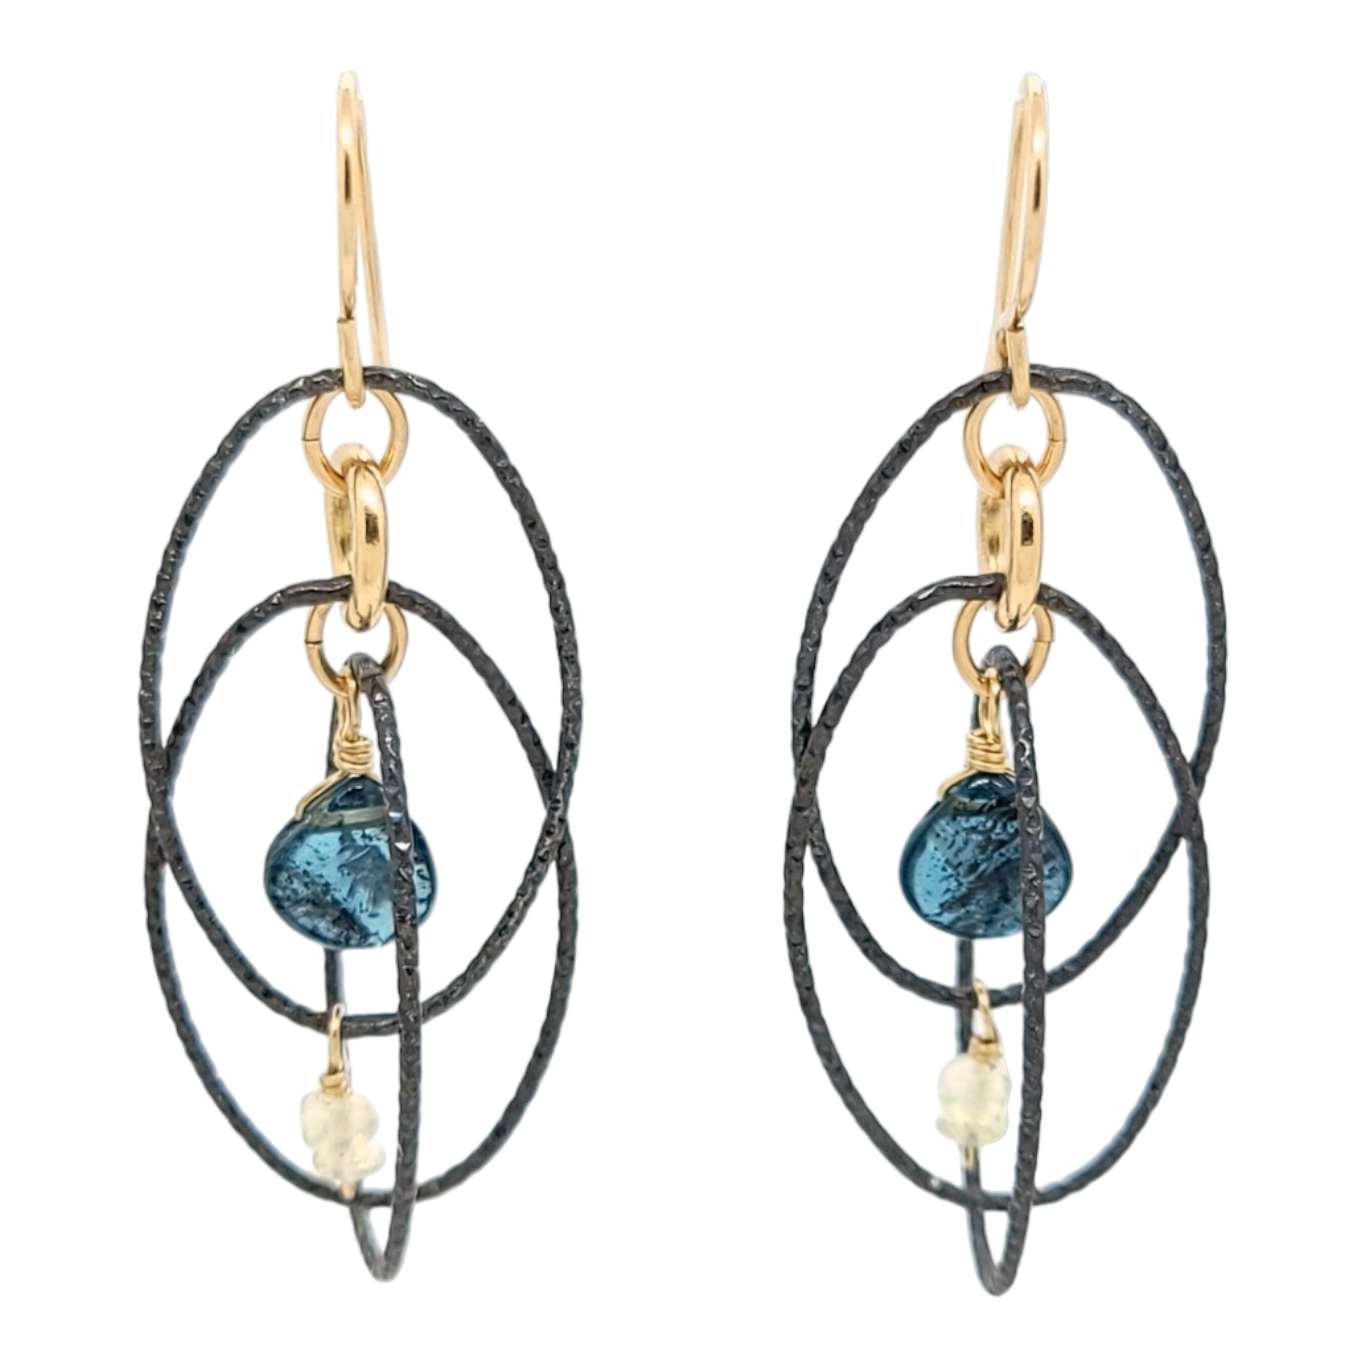 Earrings - Layered Ovals with Moss Kyanite and Opal by Calliope Jewelry